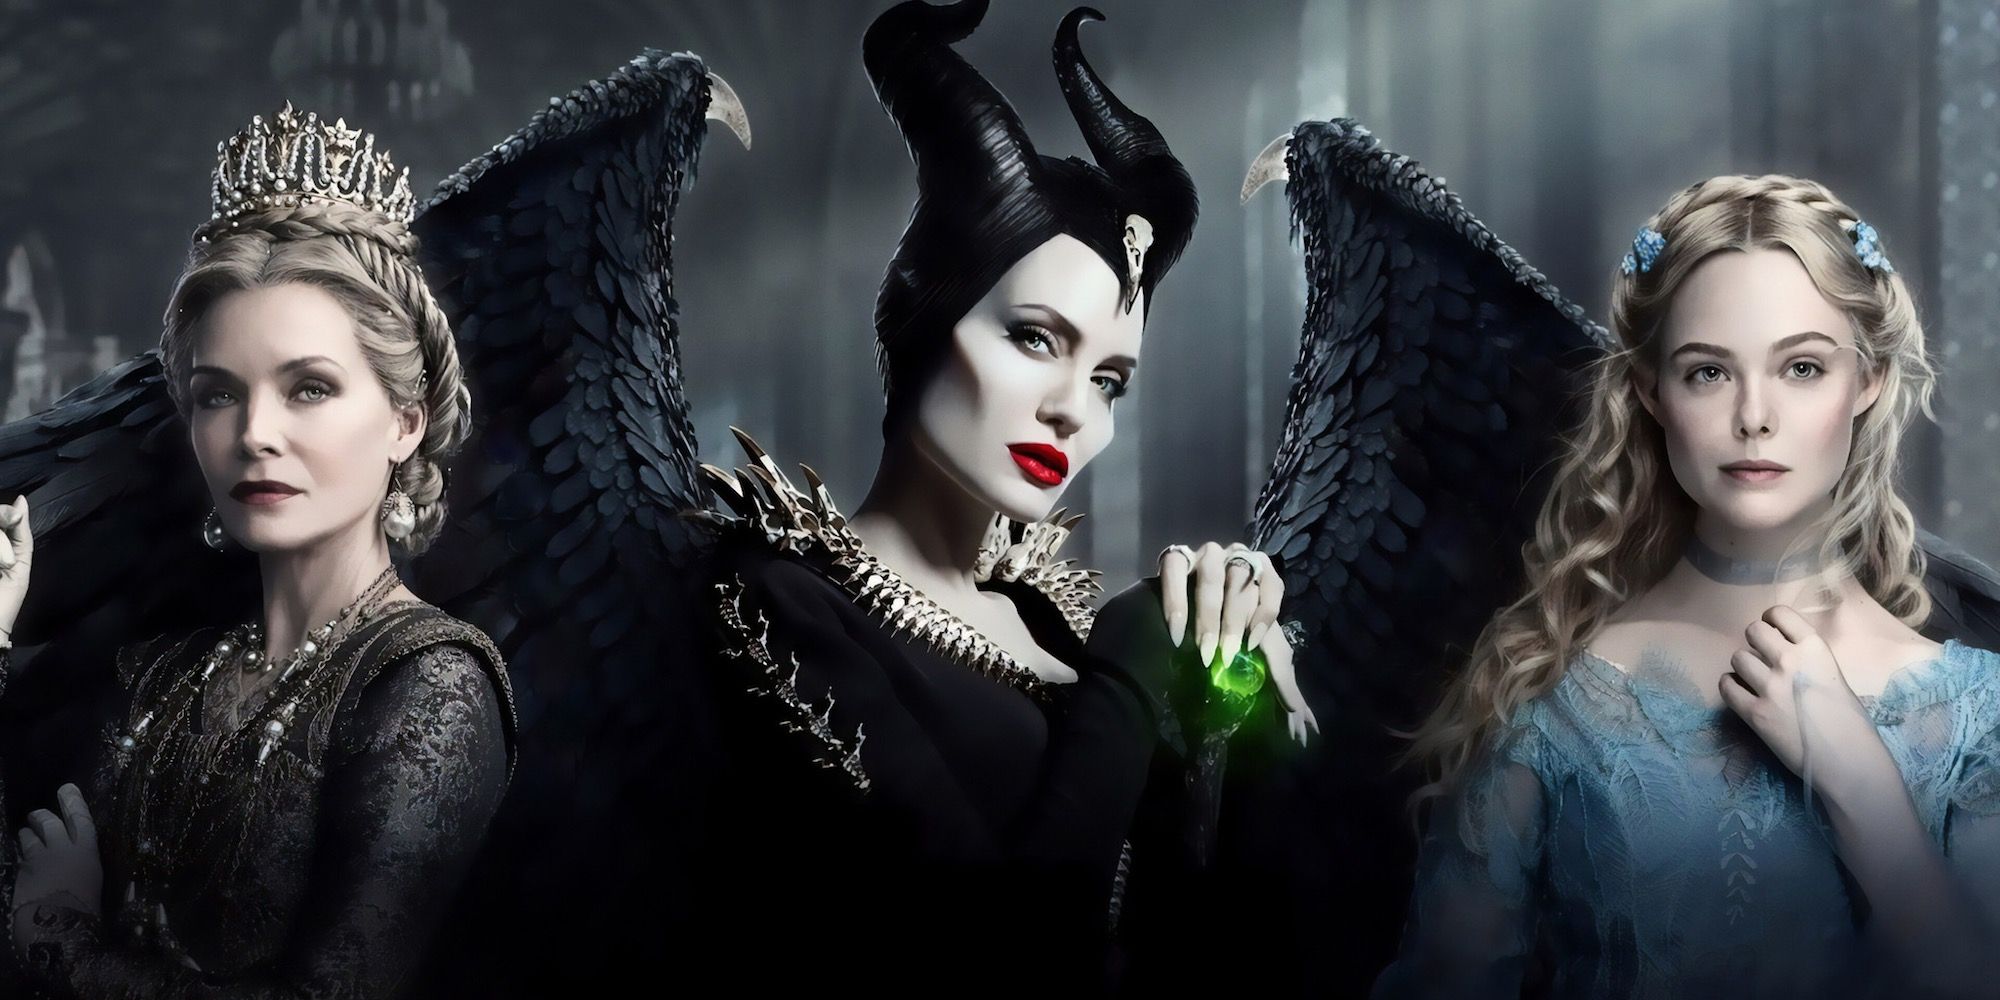 Queen Ingrith, Maleficent, and Aurora in a promotional image for Maleficent Mistress of Evil